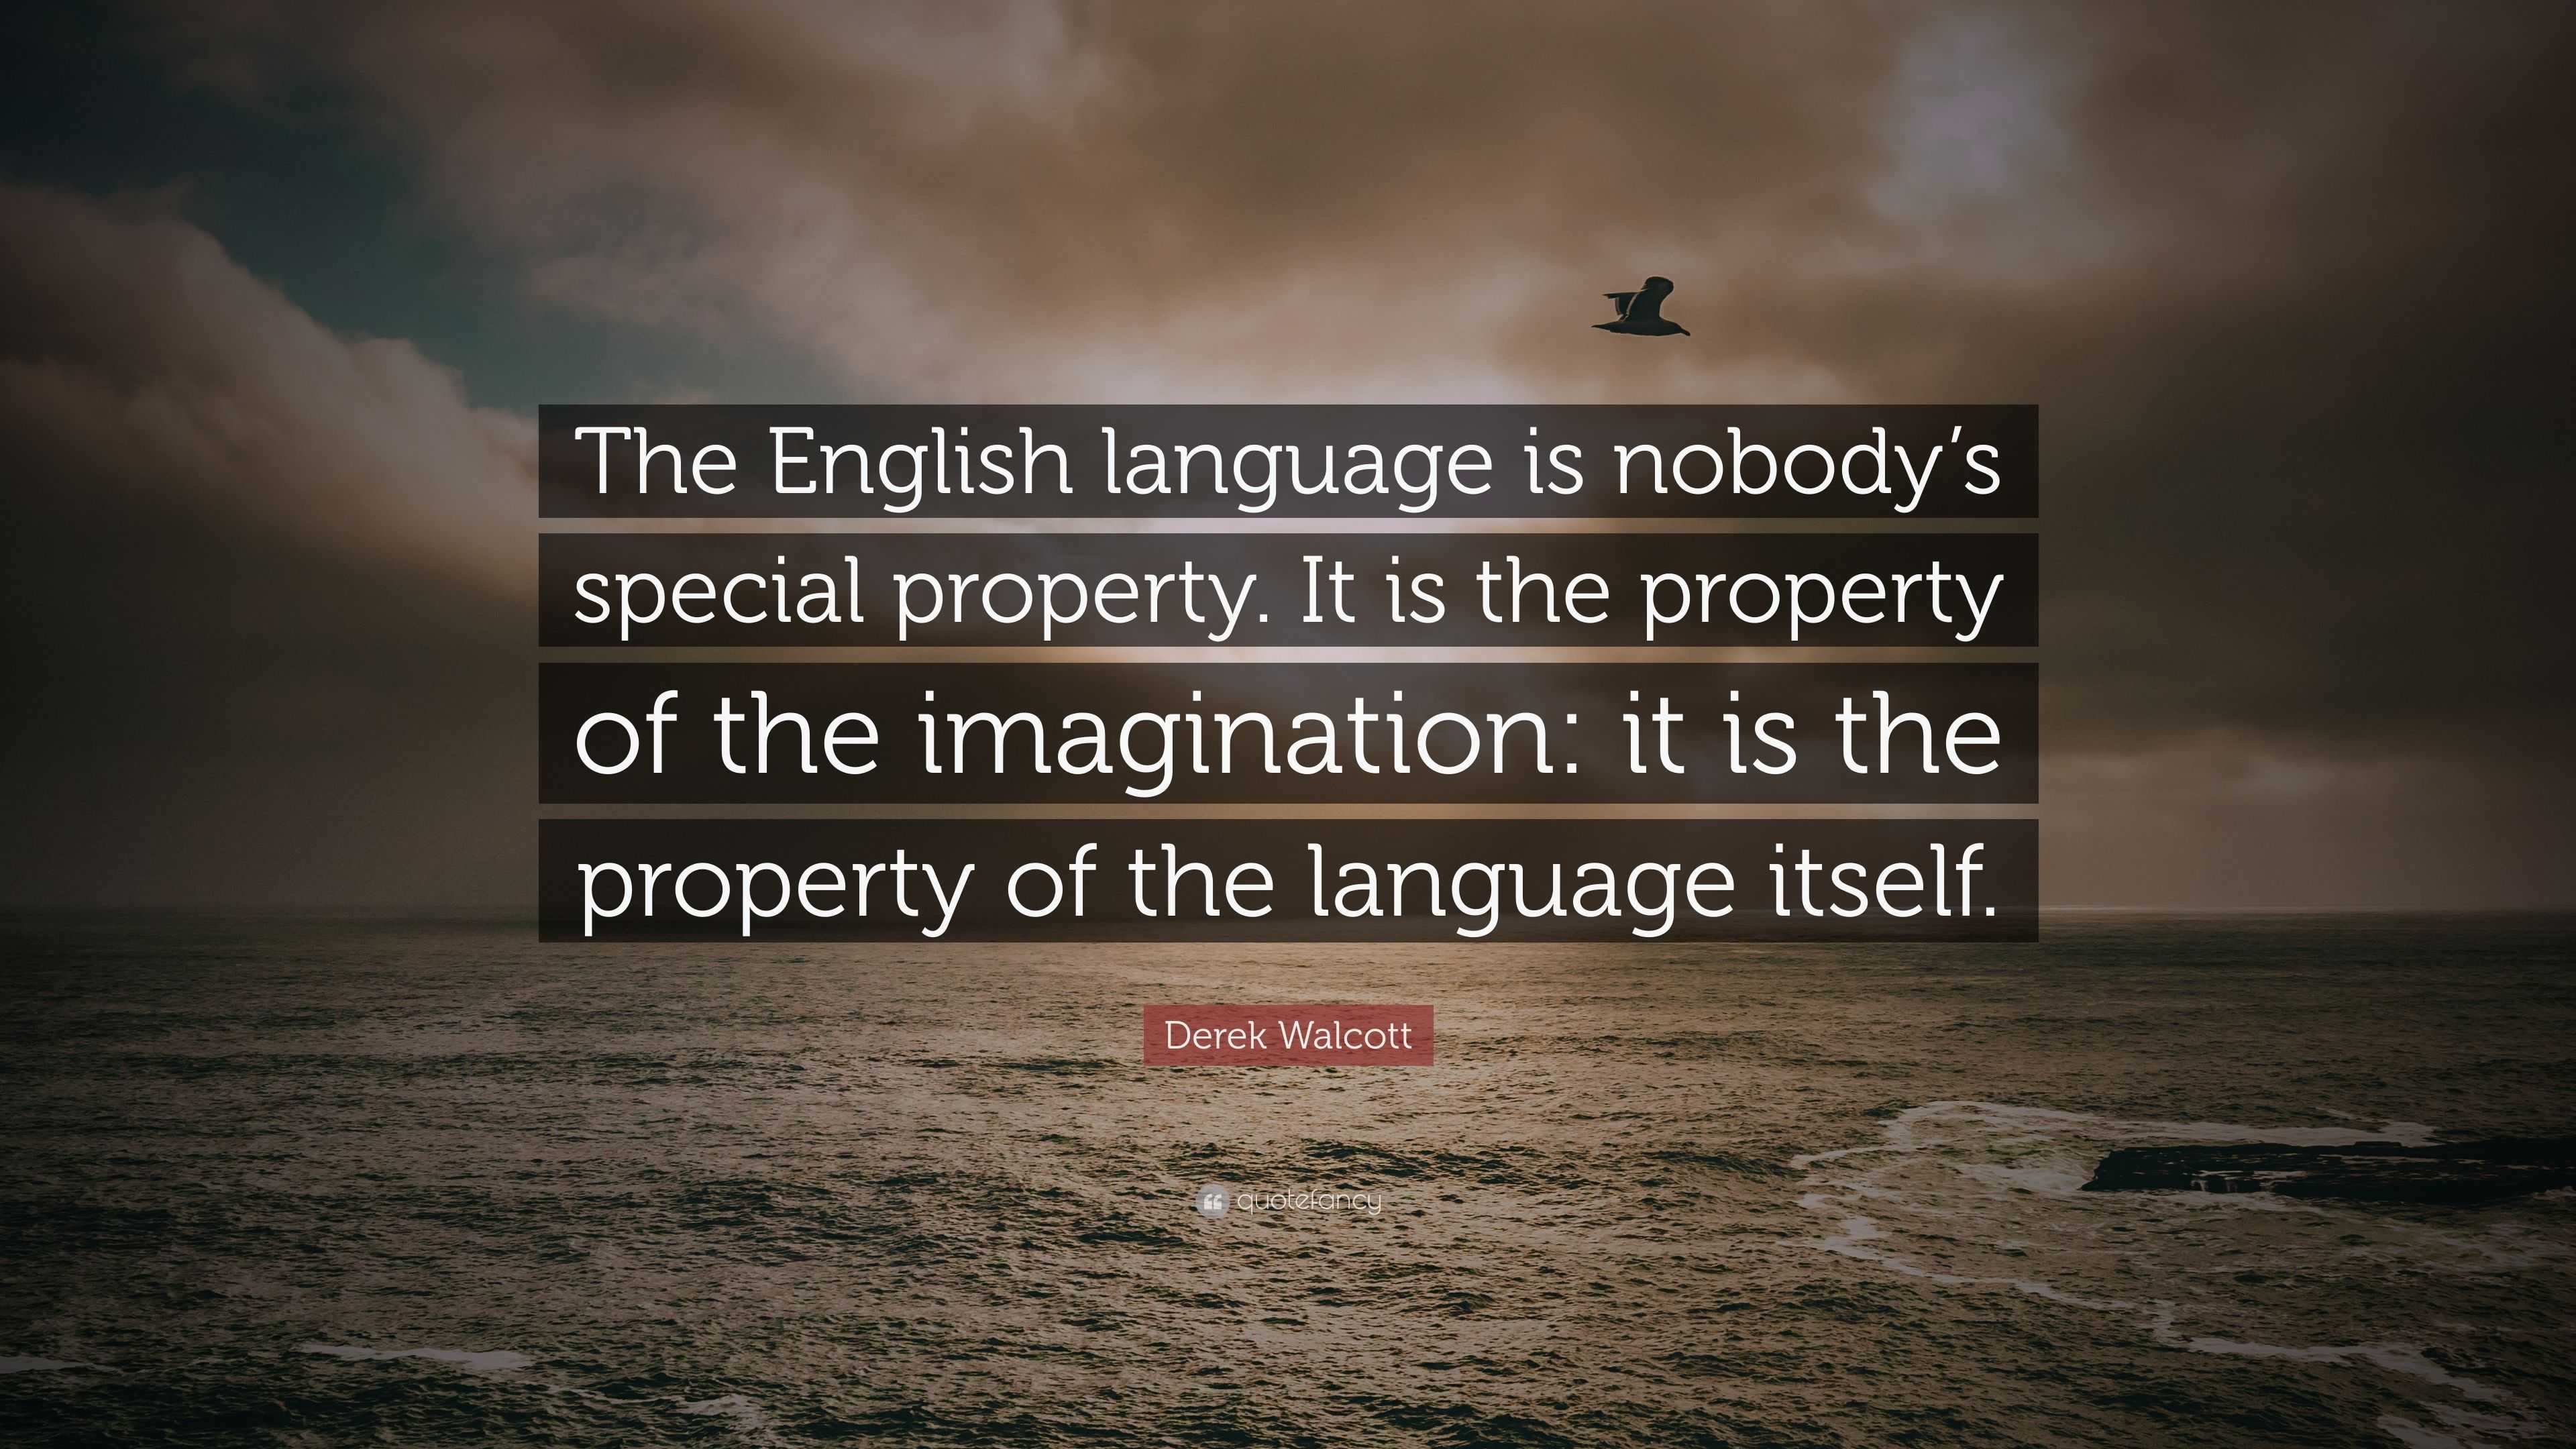 Derek Walcott Quote: “The English language is nobody’s special property ...